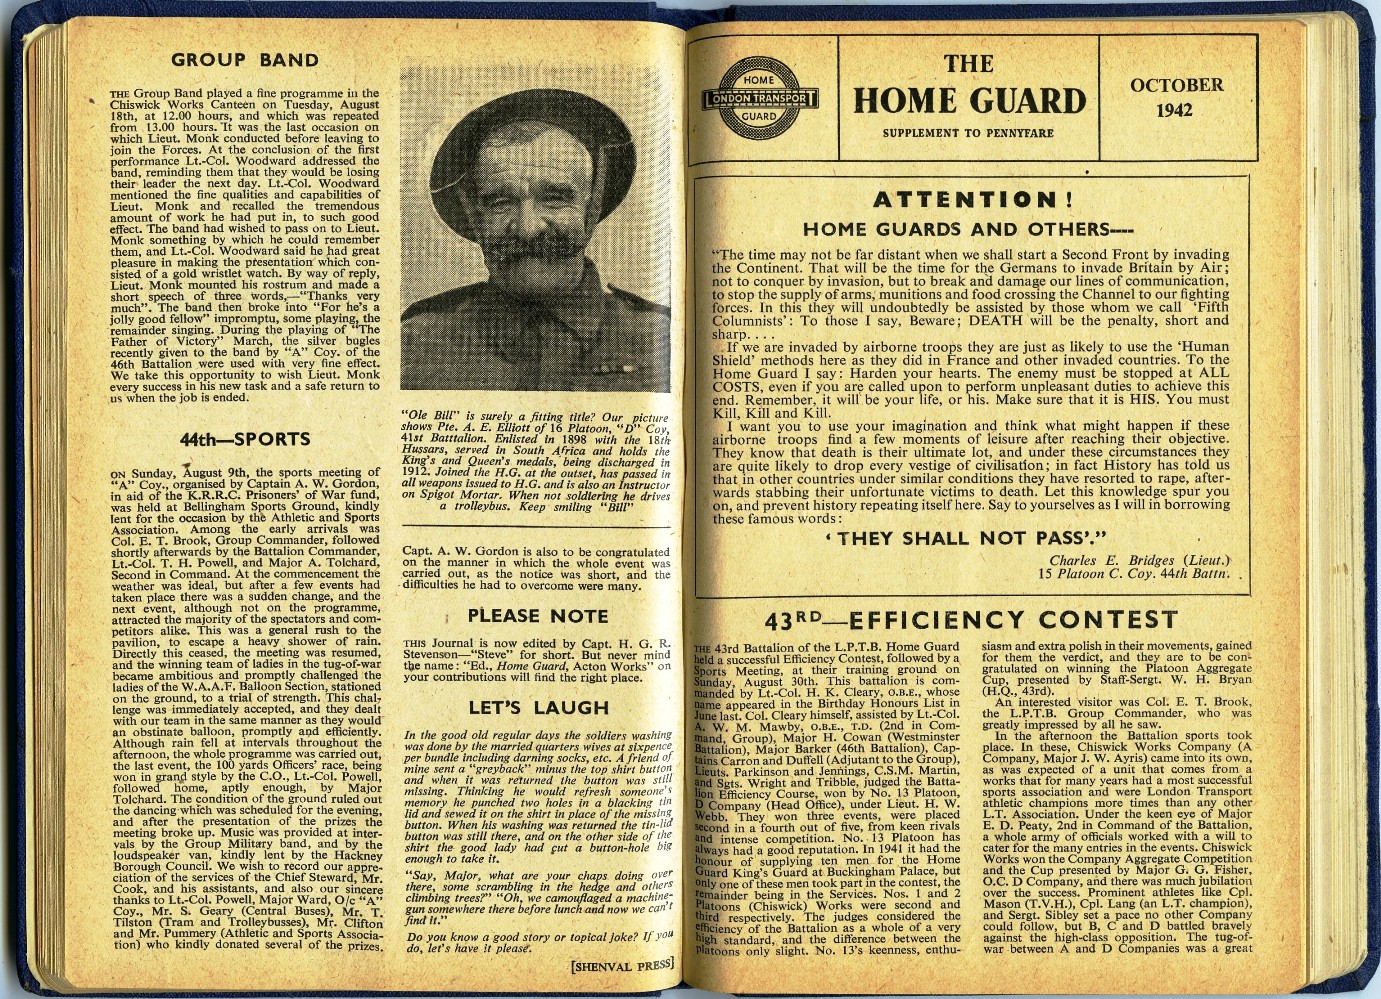 Bound Volume of the London Transport HOME GUARD SUPPLEMENTS TO PENNYFARE from October 1941 to